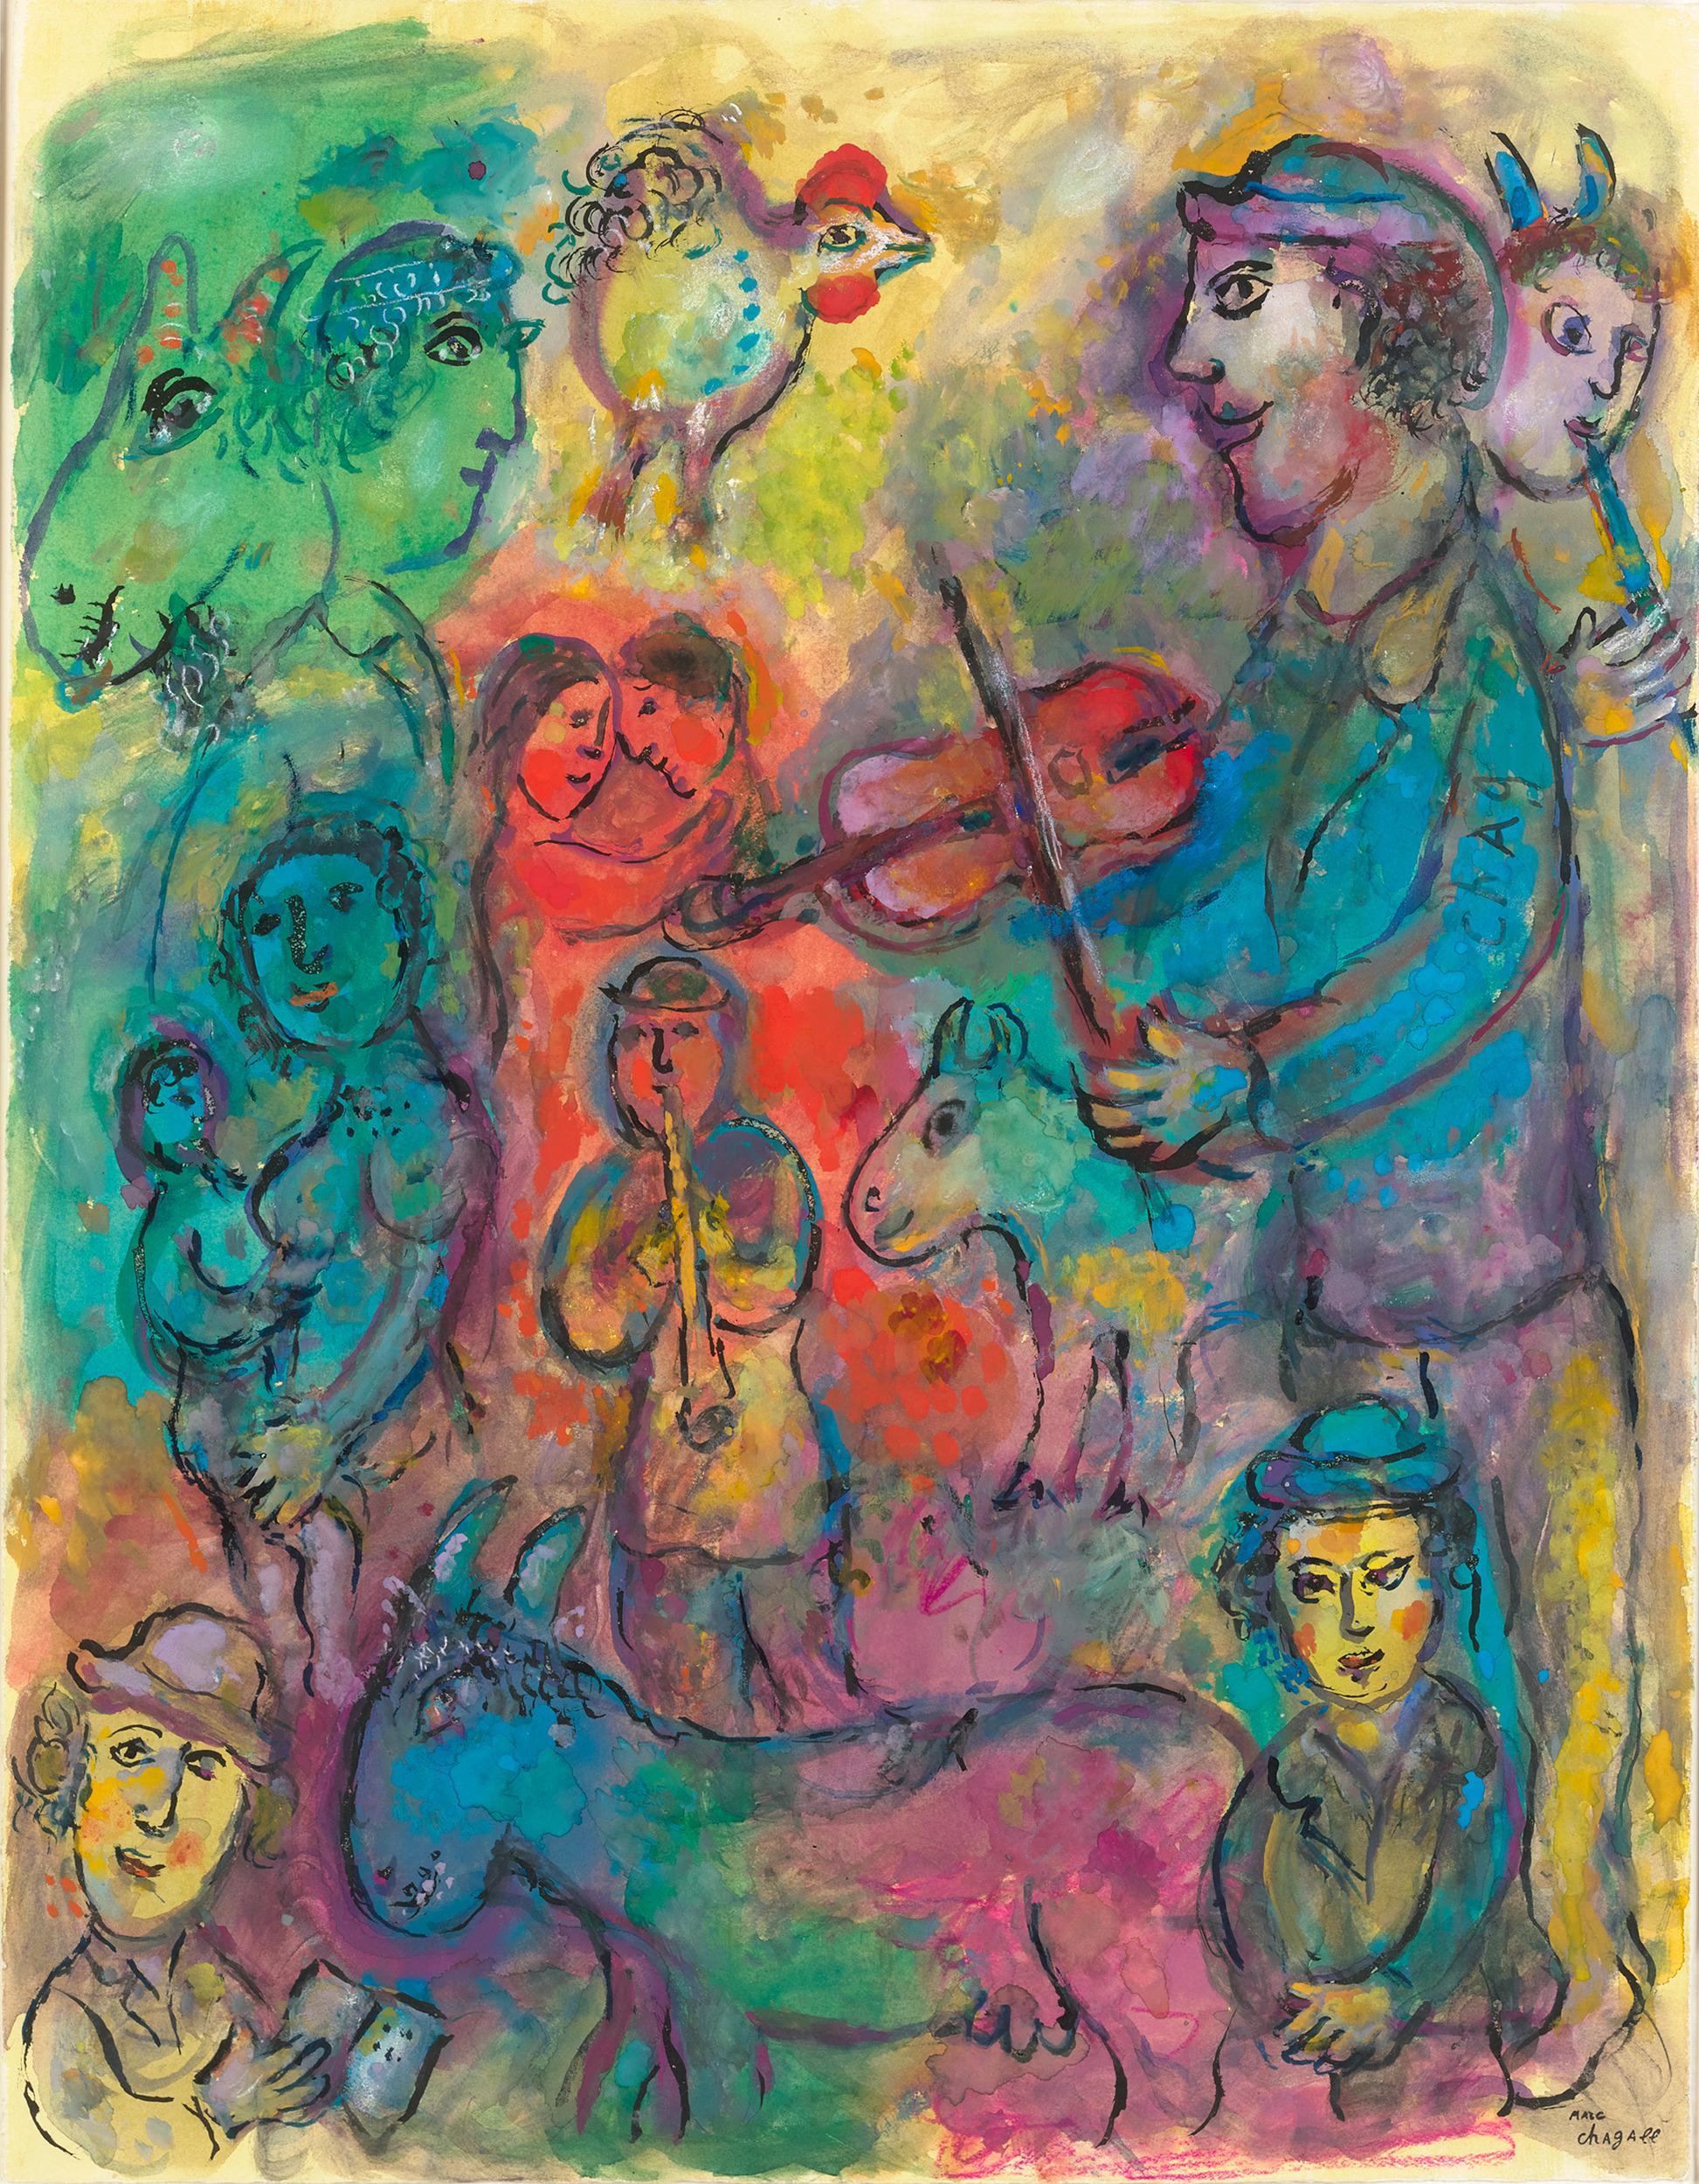 Marc Chagall
1887-1985  Russian

Musiciens sur fond multicolore
(Musicians on a multicolored background)

Signed 'Chag' (on the sleeve of the right figure); stamped with the signature 'Marc Chagall' (lower right)
Tempera, gouache, colored ink and